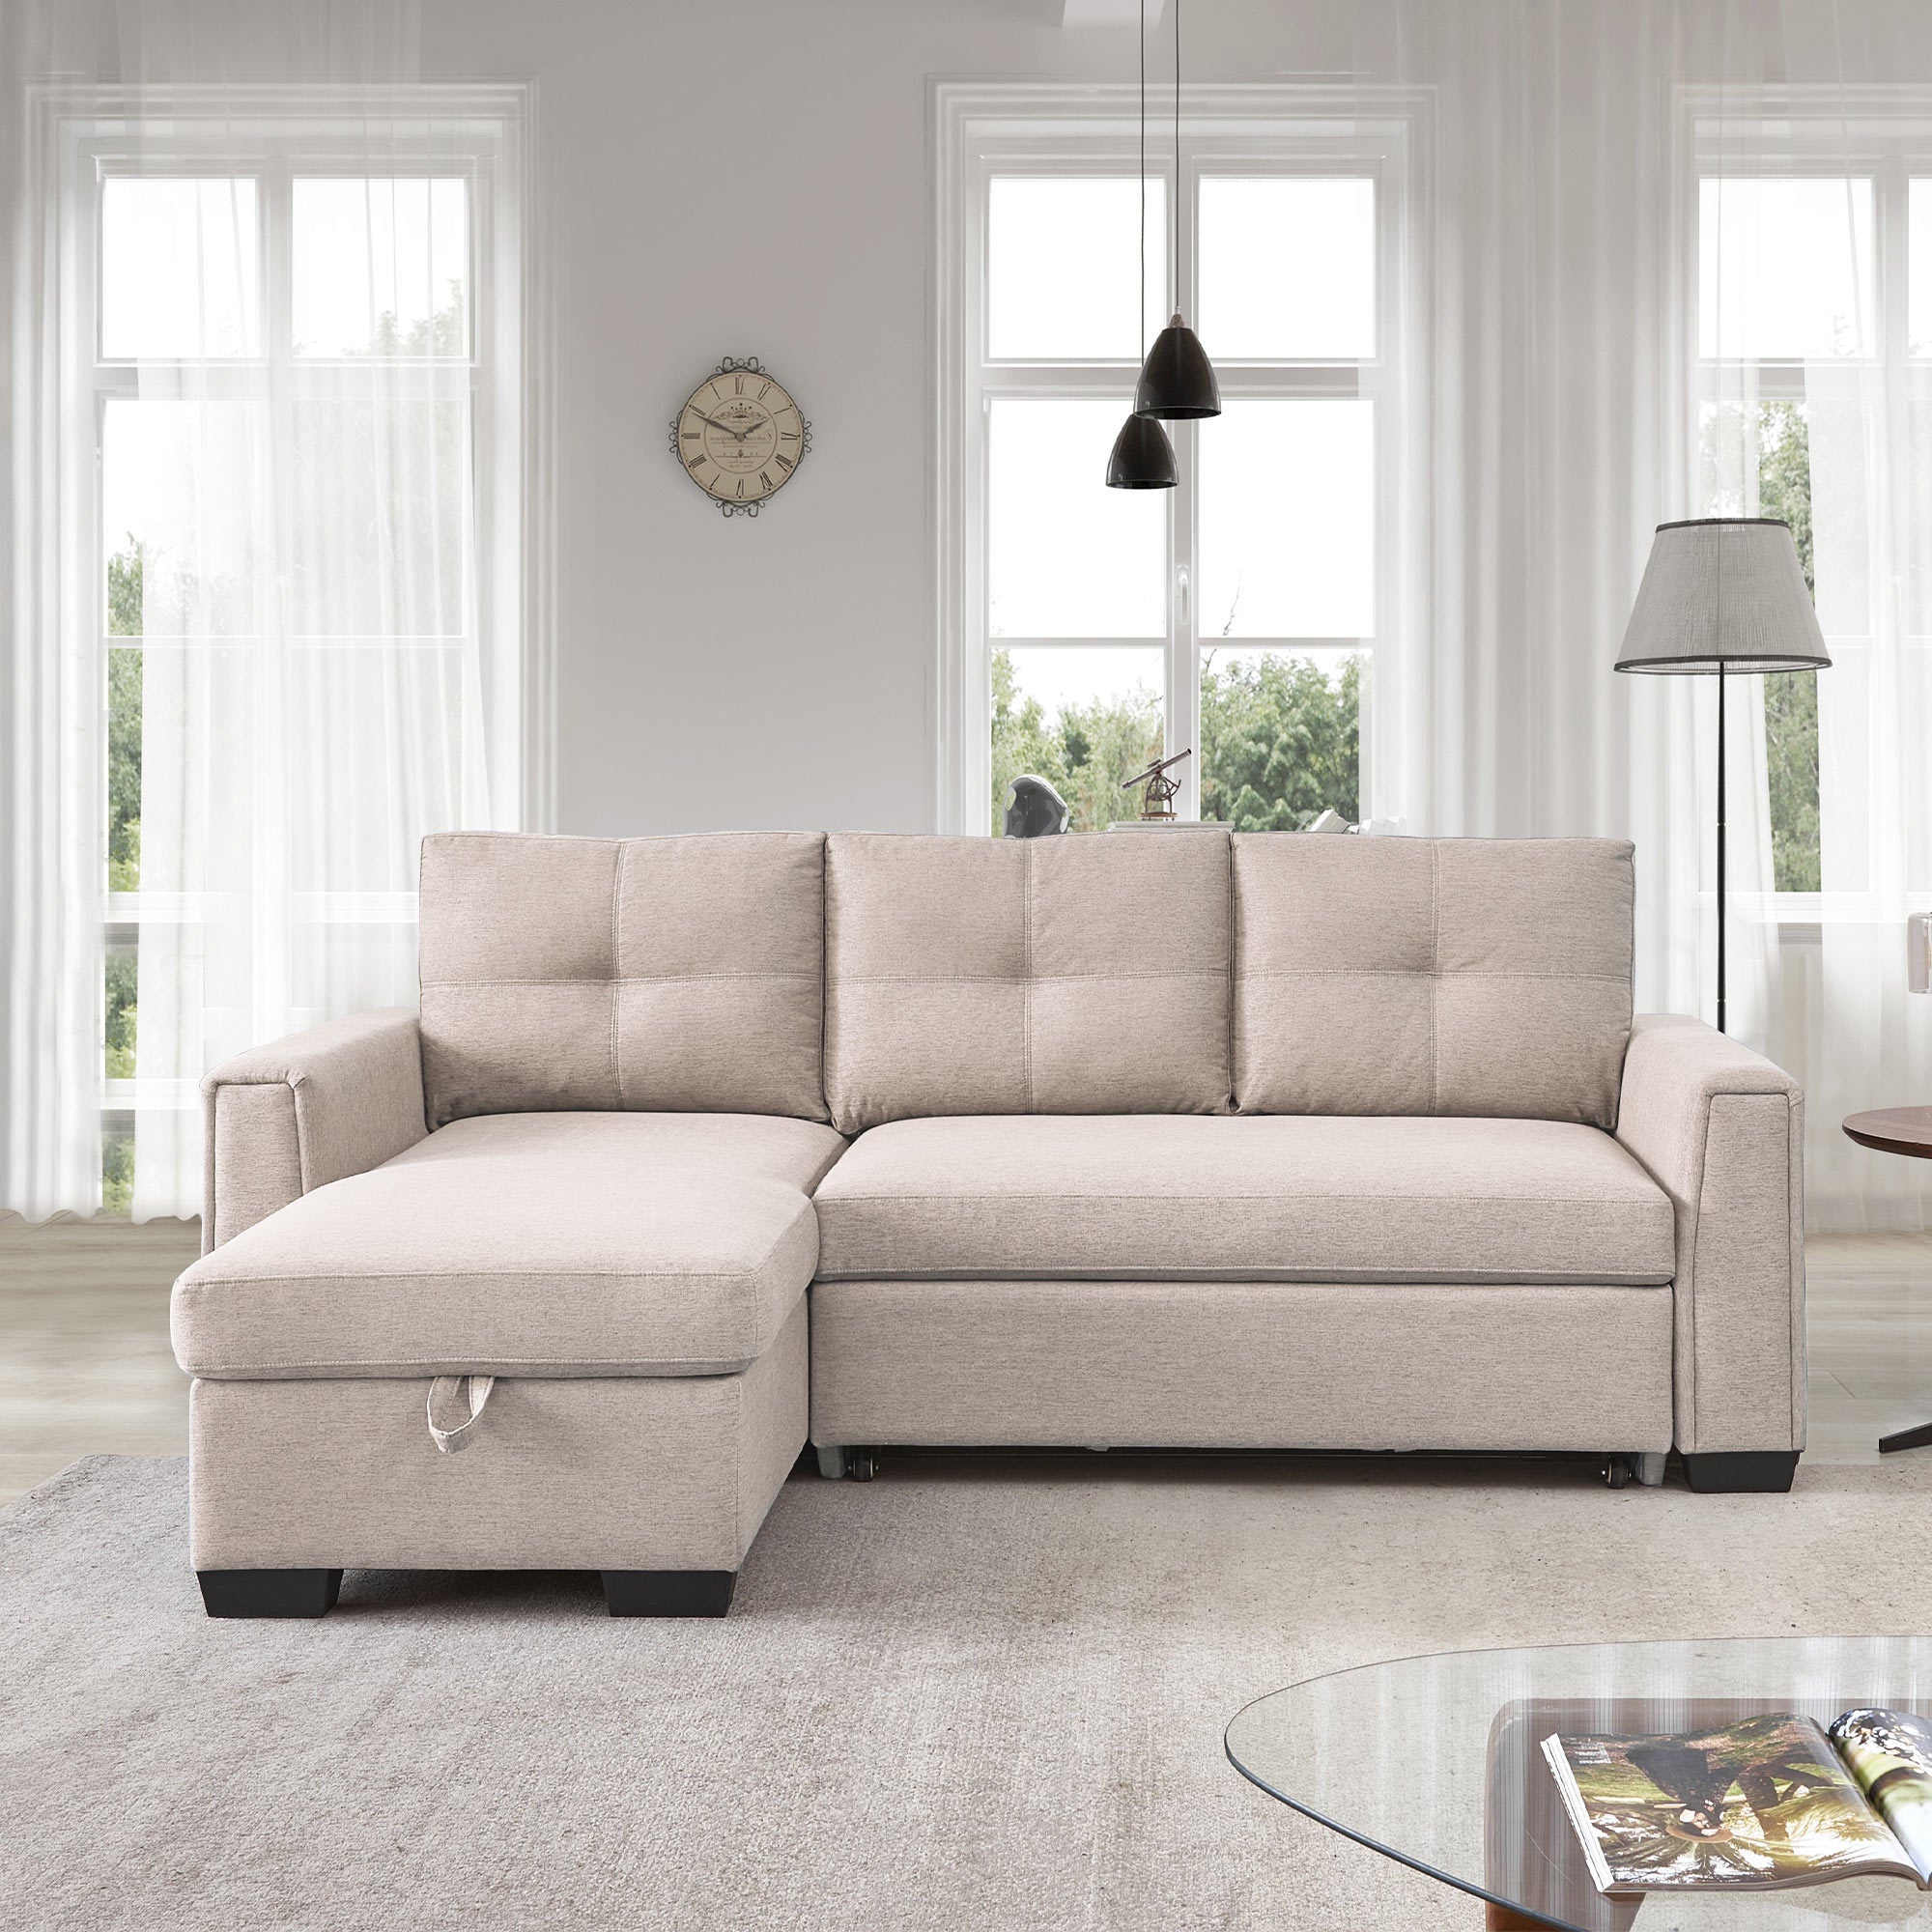 91.7" L-Shape Sleeper Sectional Sofa w/Storage Chaise - Beige Fabric Modular Couch-Sleeper Sectionals-American Furniture Outlet